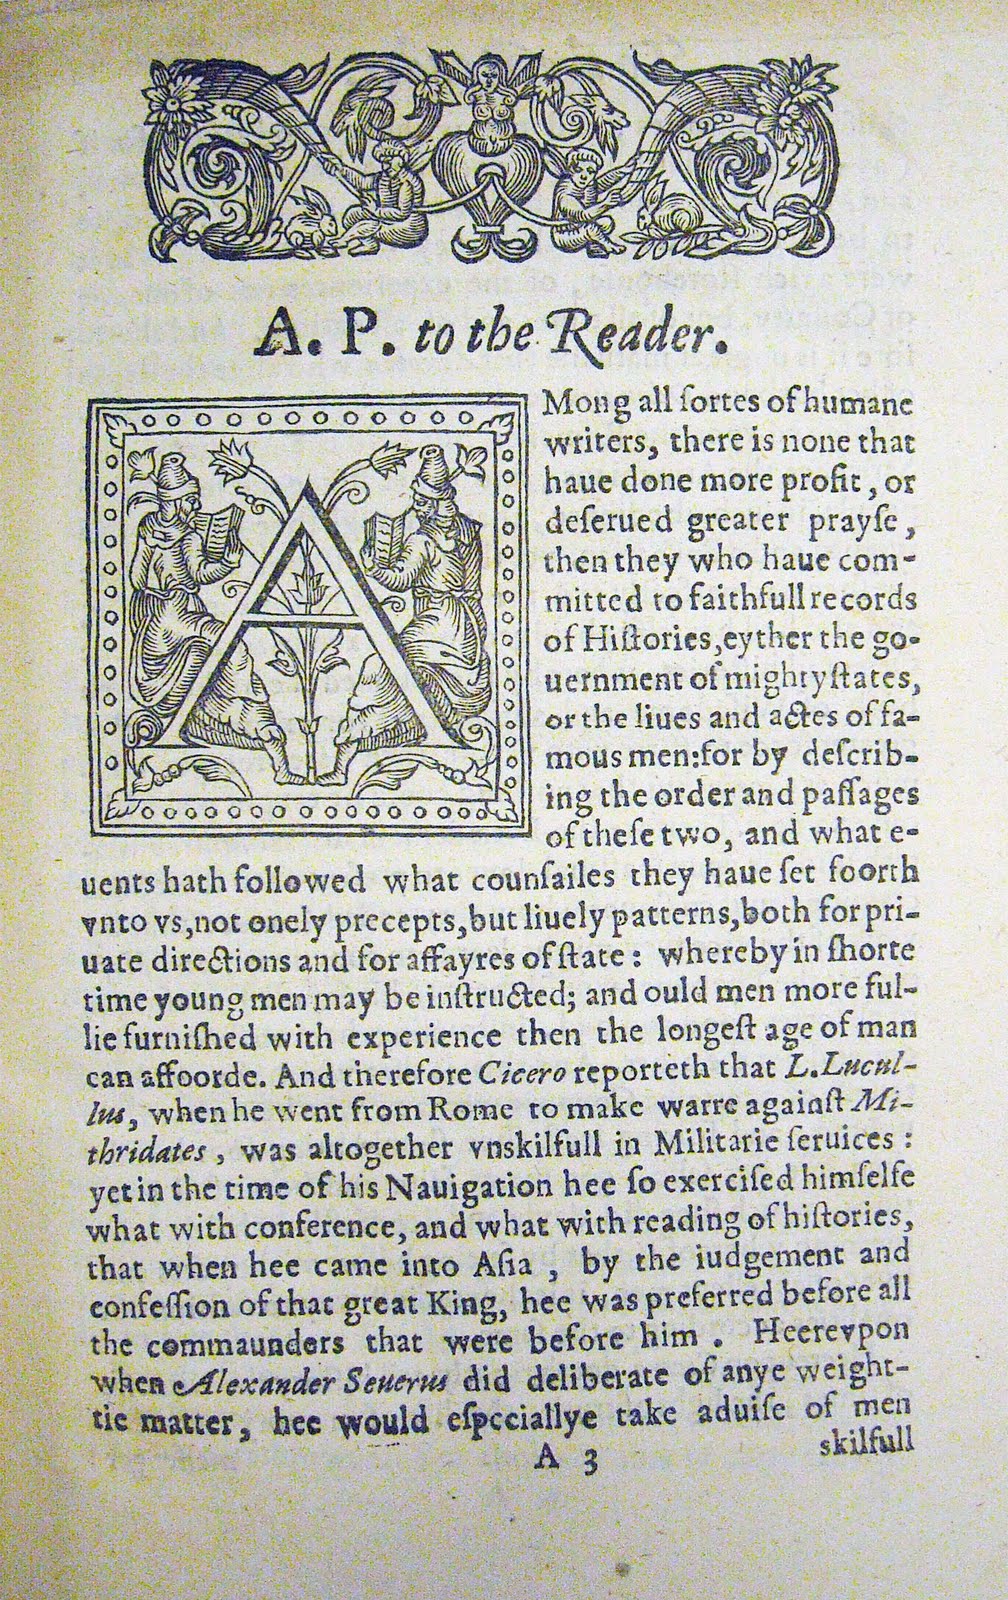 A.P. to Reader, Excerpt from The First Part of the Life and raigne of King Henrie the IIII